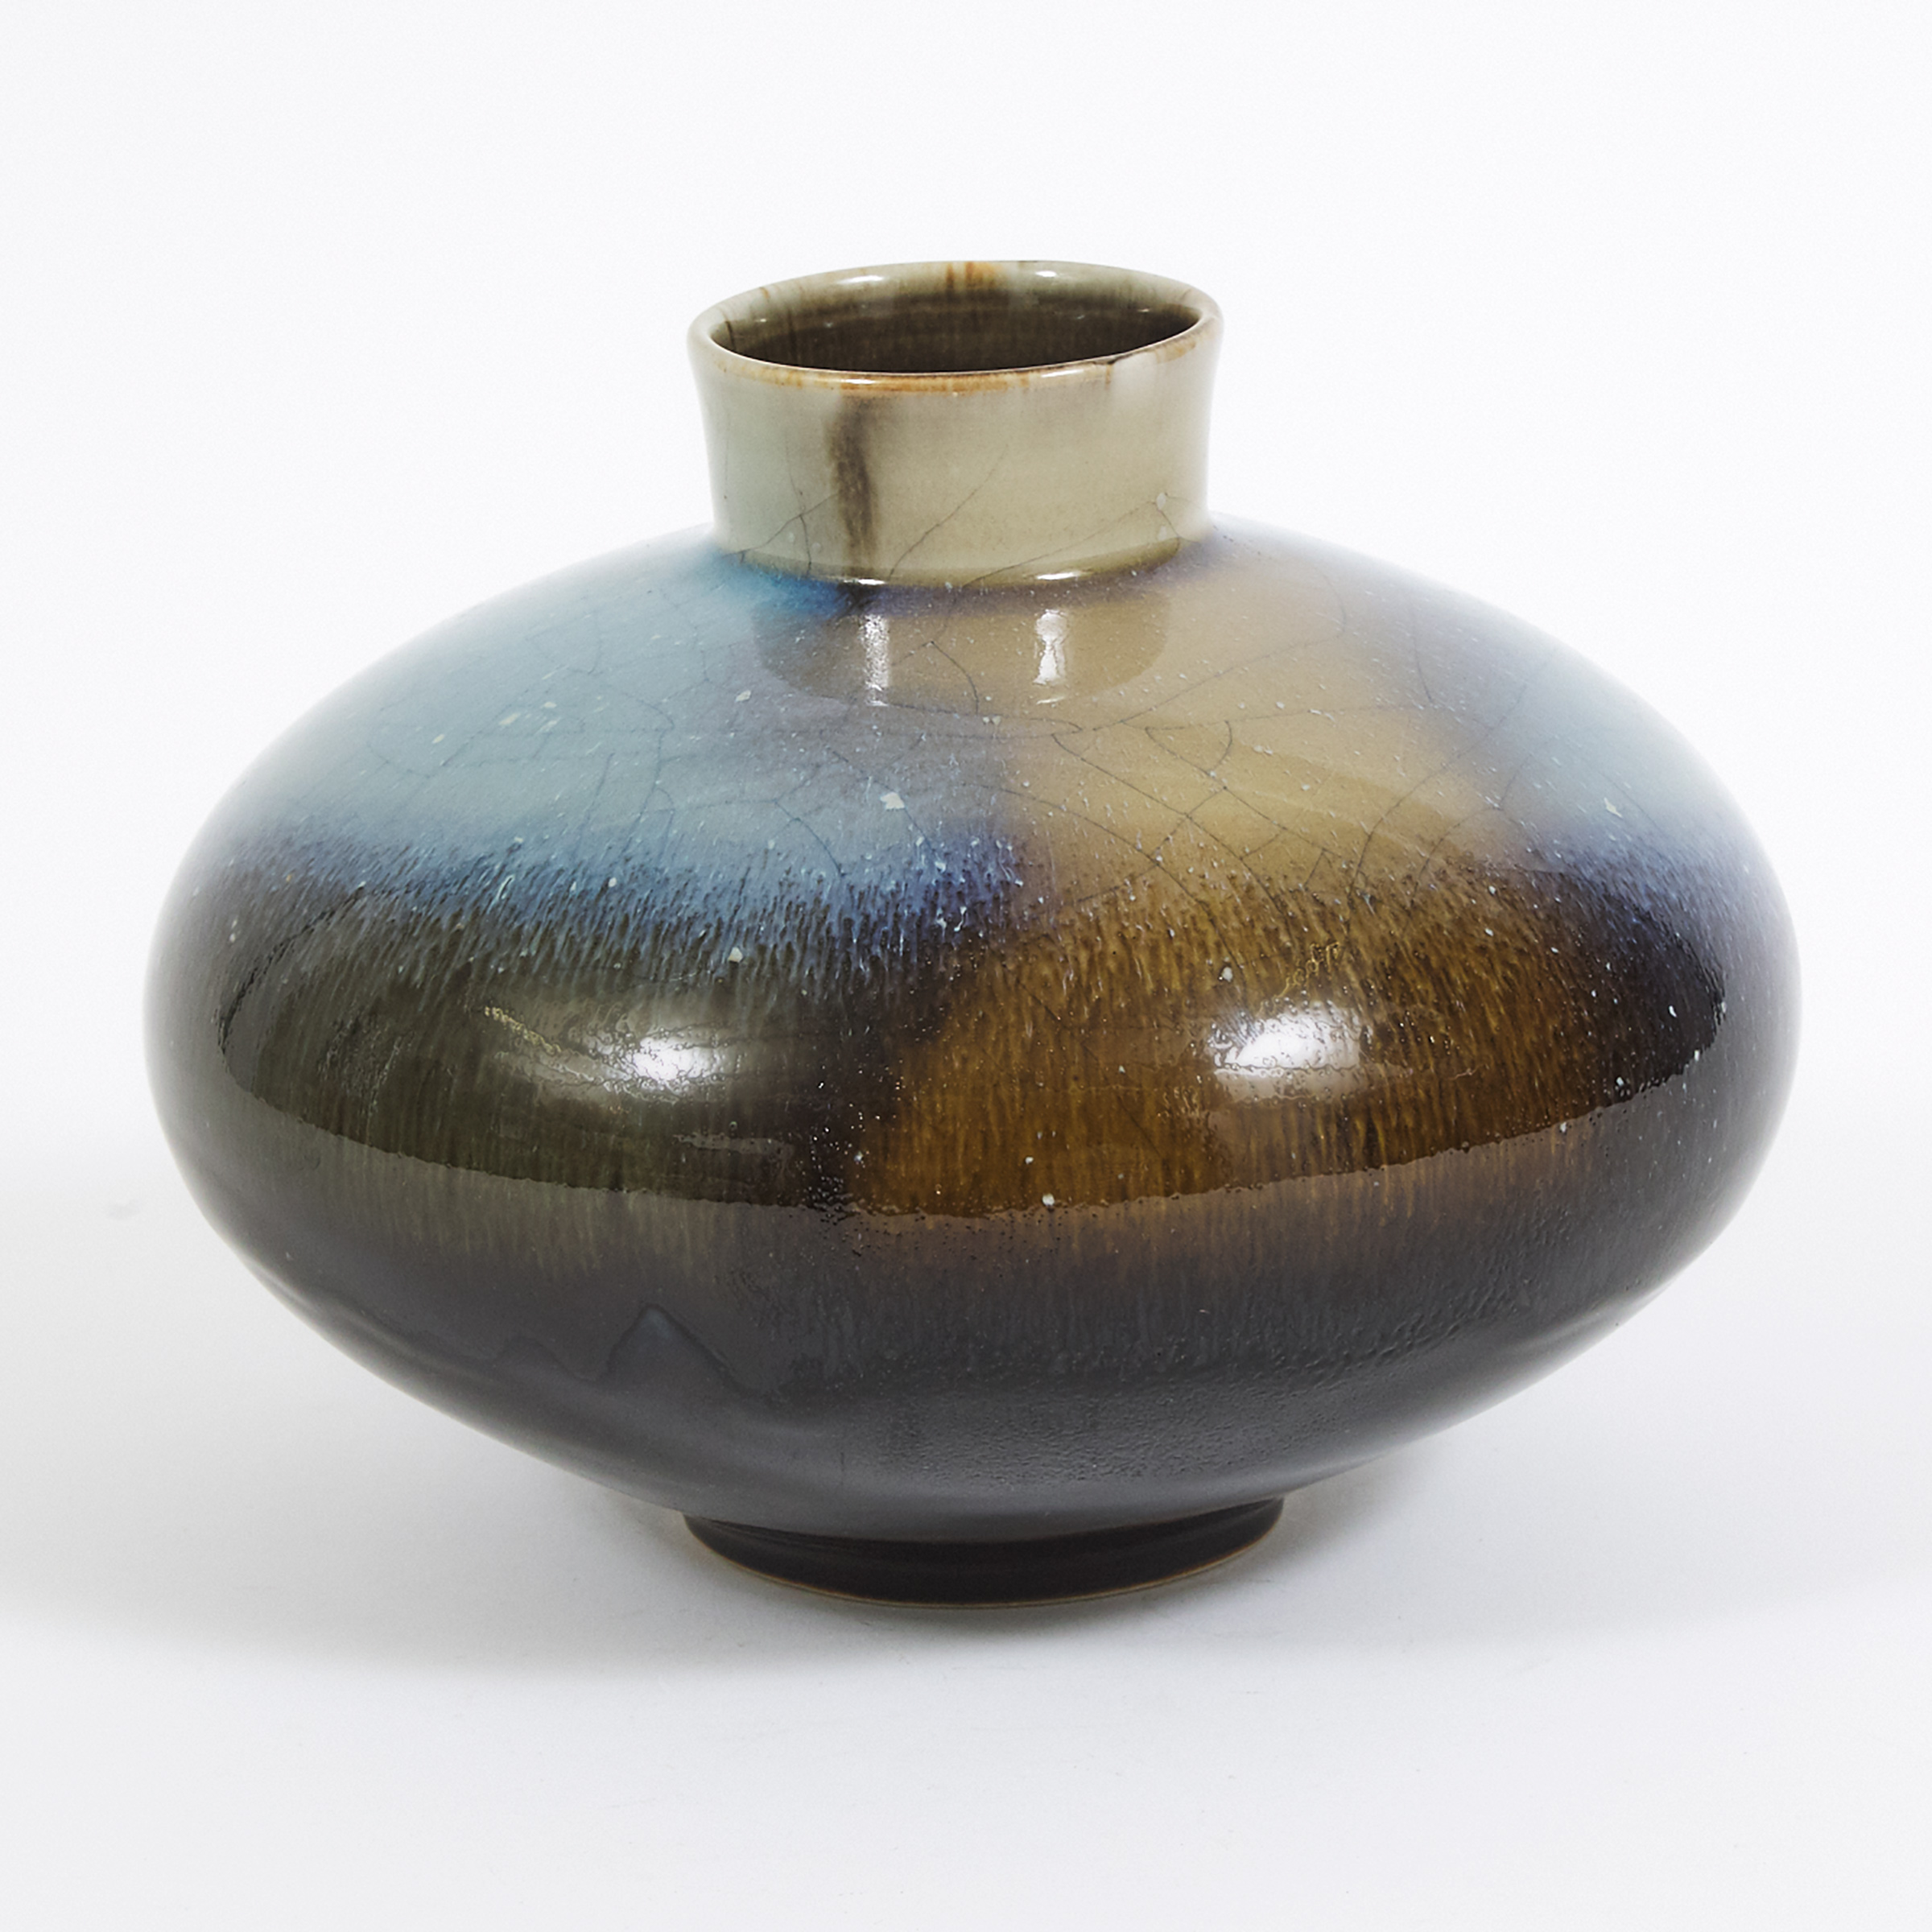 Harlan House (Canadian, b.1943), Blue and Brown Glazed Vase, 1993